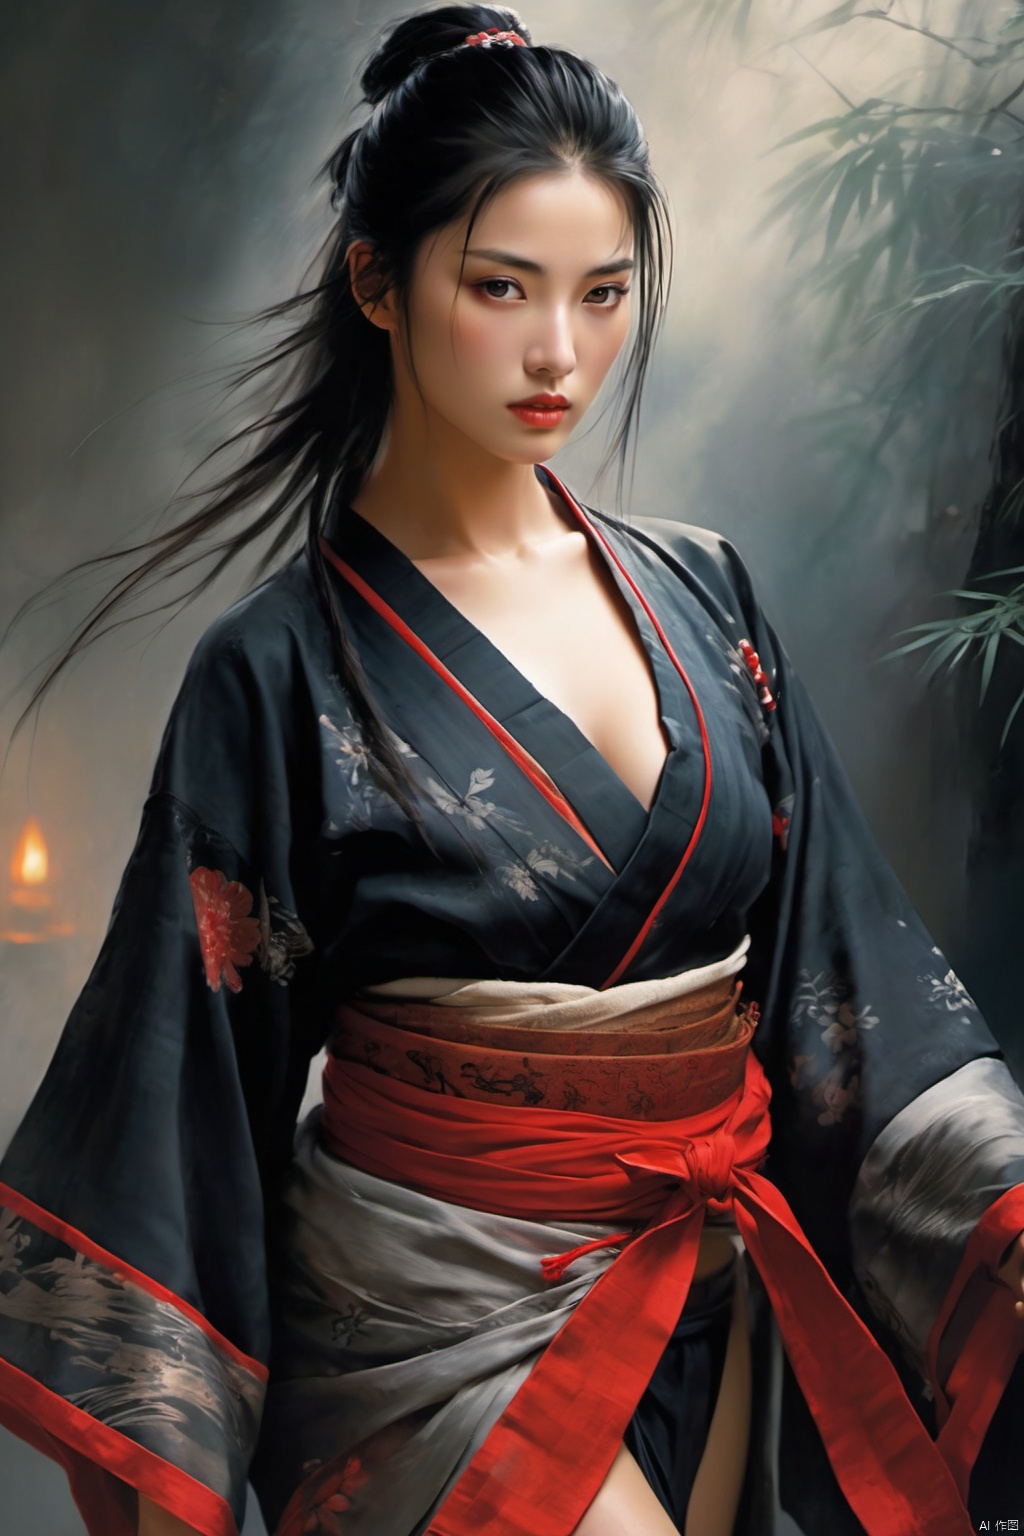 In the mesmerizing style of Luis Royo, behold a young female samurai, her fierce spirit encapsulated in the depths of her glowing crimson eyes. With long, braided dark hair cascading down her back, she stands proudly in a short black silk yukata, revealing intricate tattoos adorning her arms and legs. Surrounded by dancing shadows that seem to echo her inner turmoil, she emanates a potent blend of sadness and anger, her expression a powerful testament to her resolve. Royo's signature graphic style brings her to life with dynamic lines and intricate detailing, capturing every essence of her badass demeanor and fiery determination.